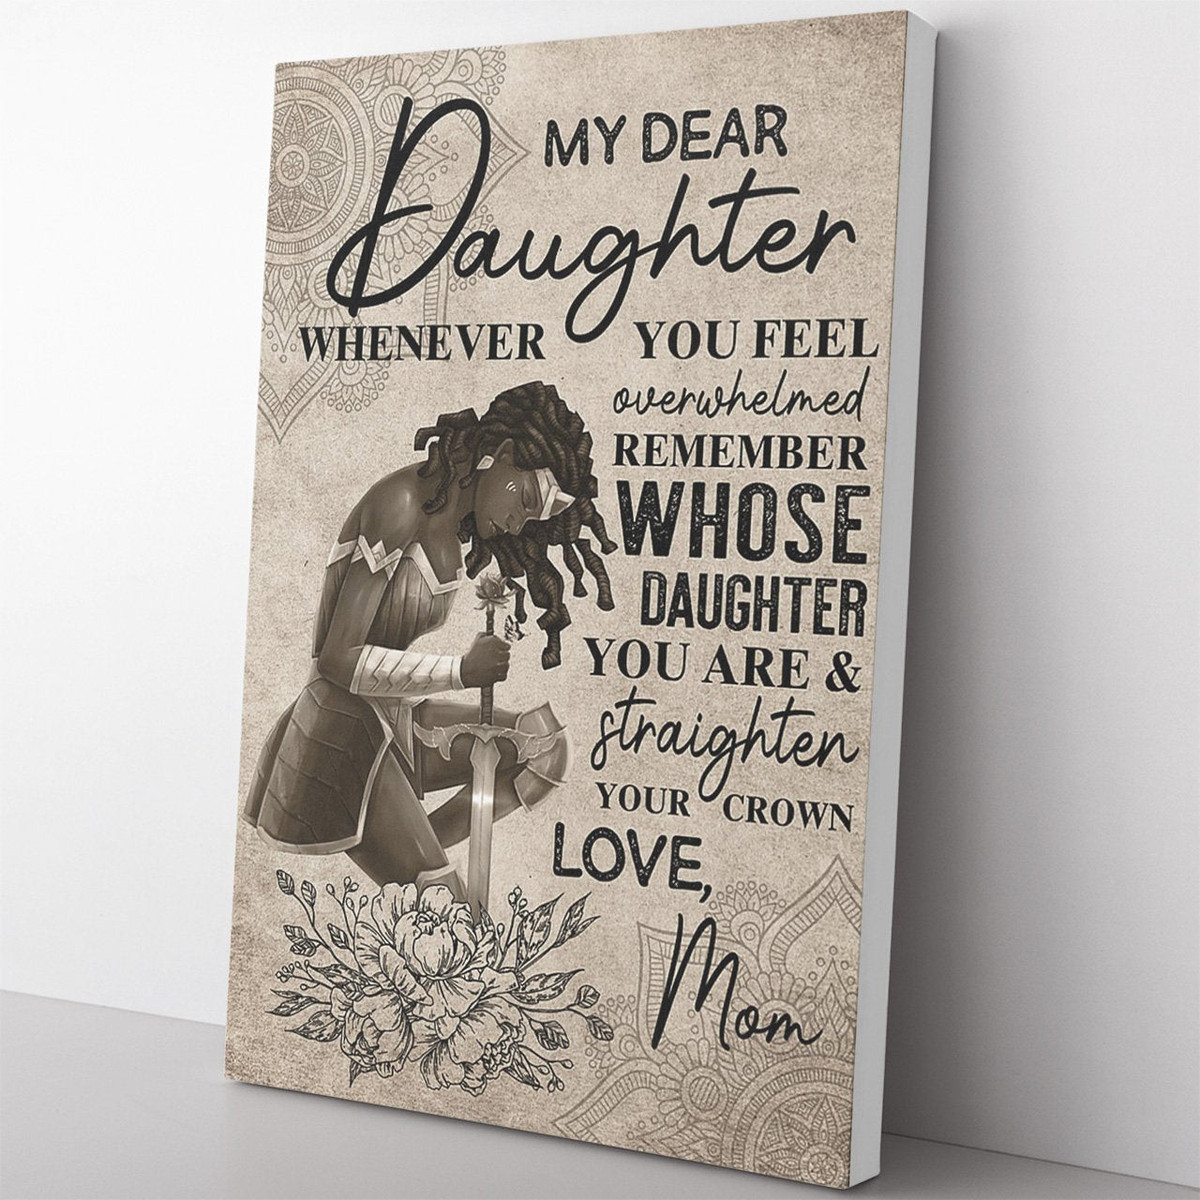 Black Warrior Daughter Gift, Remember Whose Daughter You Are, Straighten Your Crown From Mom Framed Prints, Canvas Paintings Wrapped Canvas 8x10